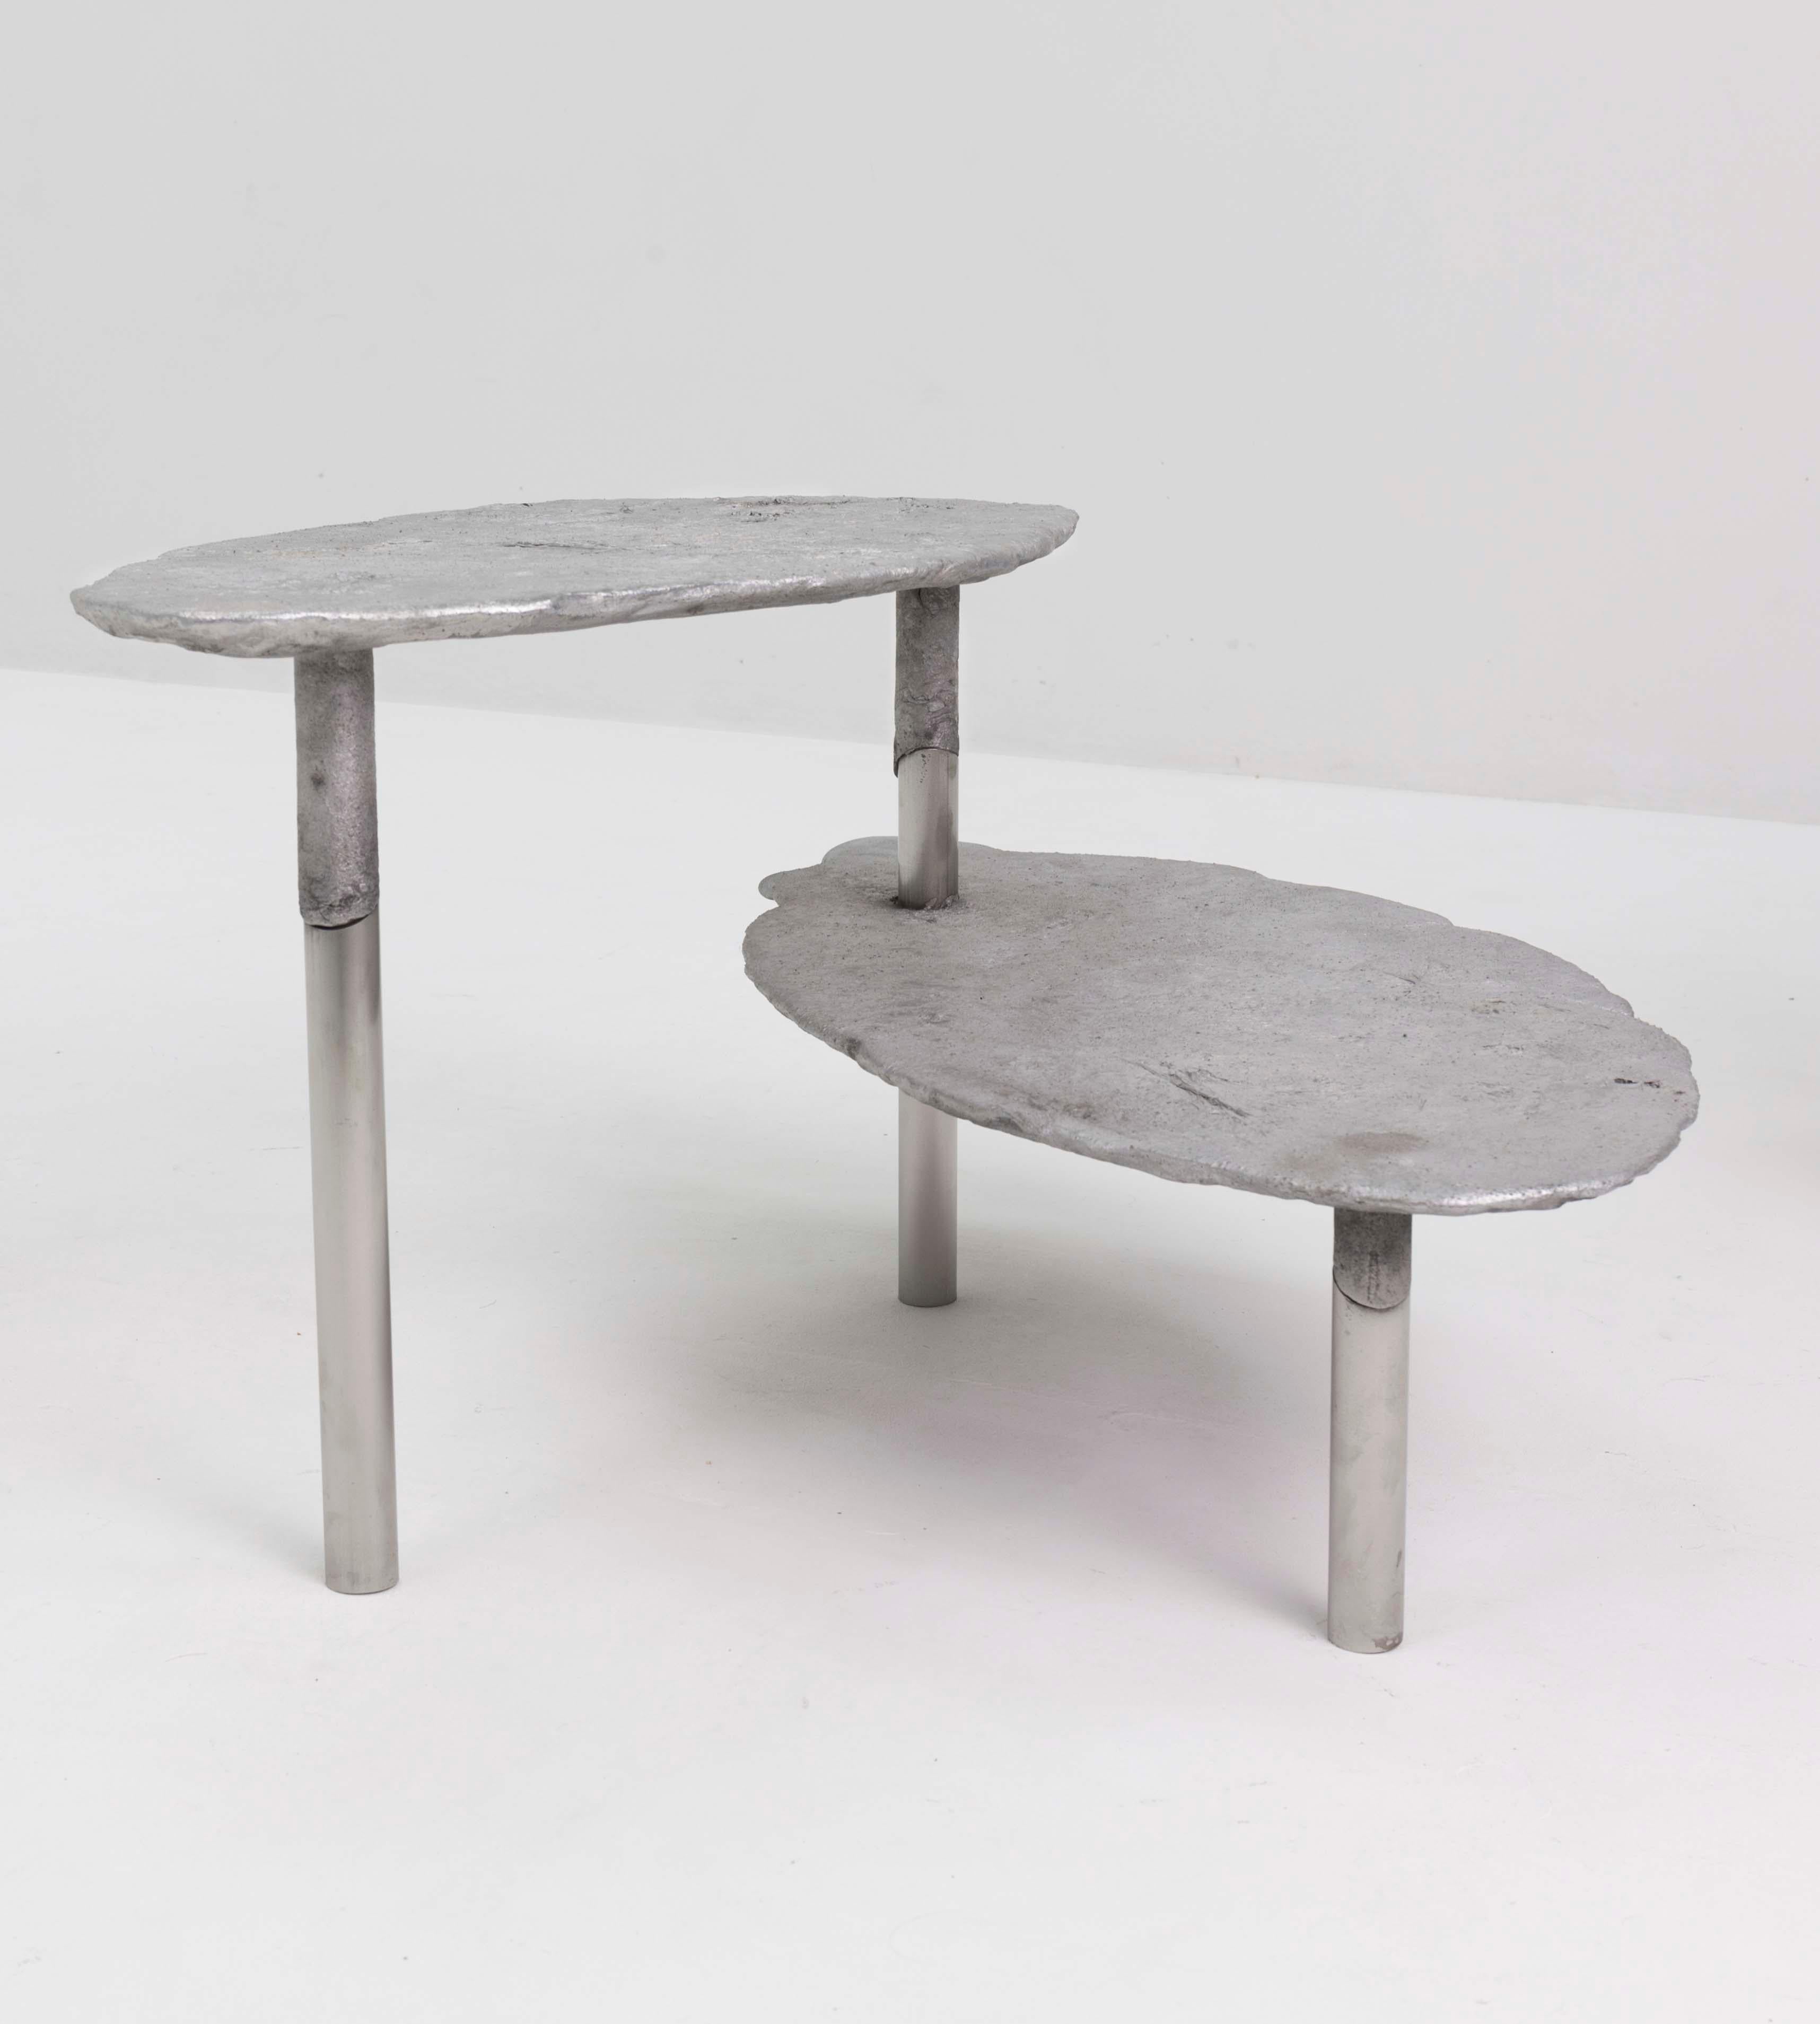 Aluminum concretion coffee table by Studio Julien Manaira
Dimensions: 65 x 65 x 40 cm
Materials: Aluminium and stainless steel

The concretion project consists of sand-casting aluminium in a base of stainless steel tubes to form objects. The